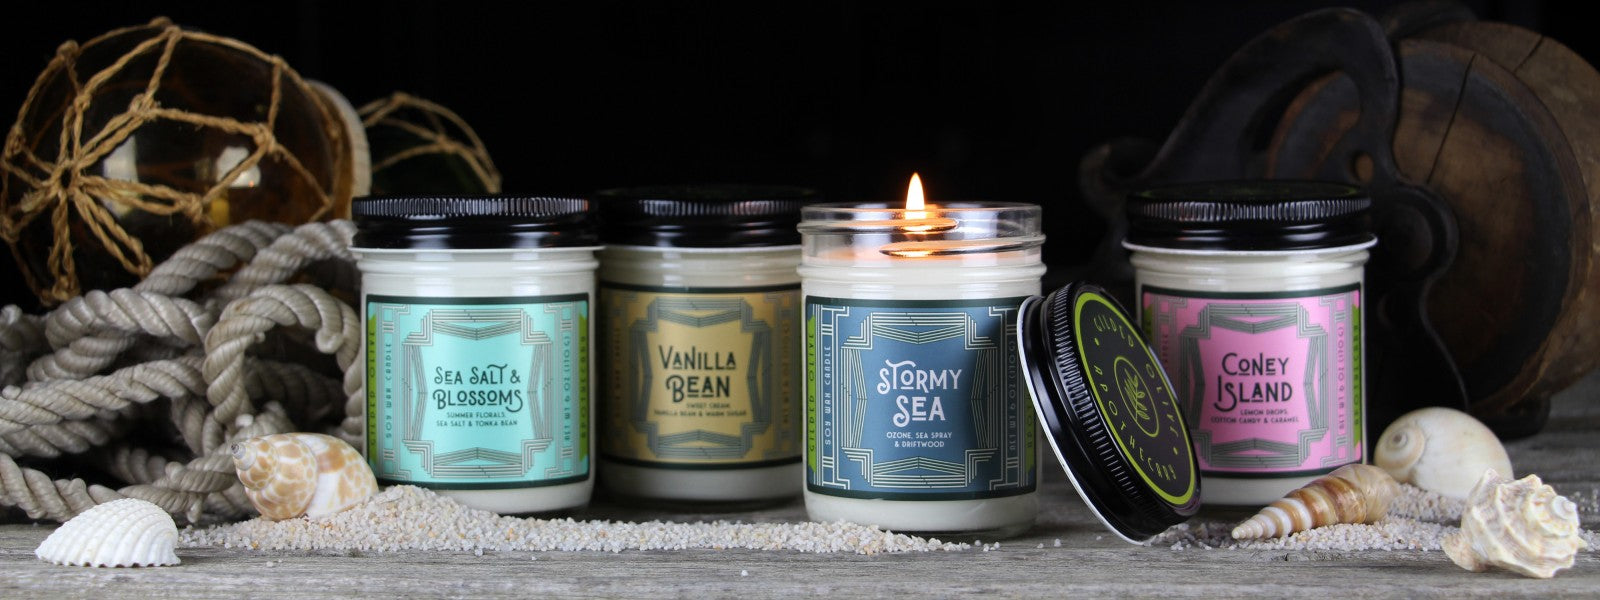 Ocean Boardwalk Collection | Gilded Olive Apothecary